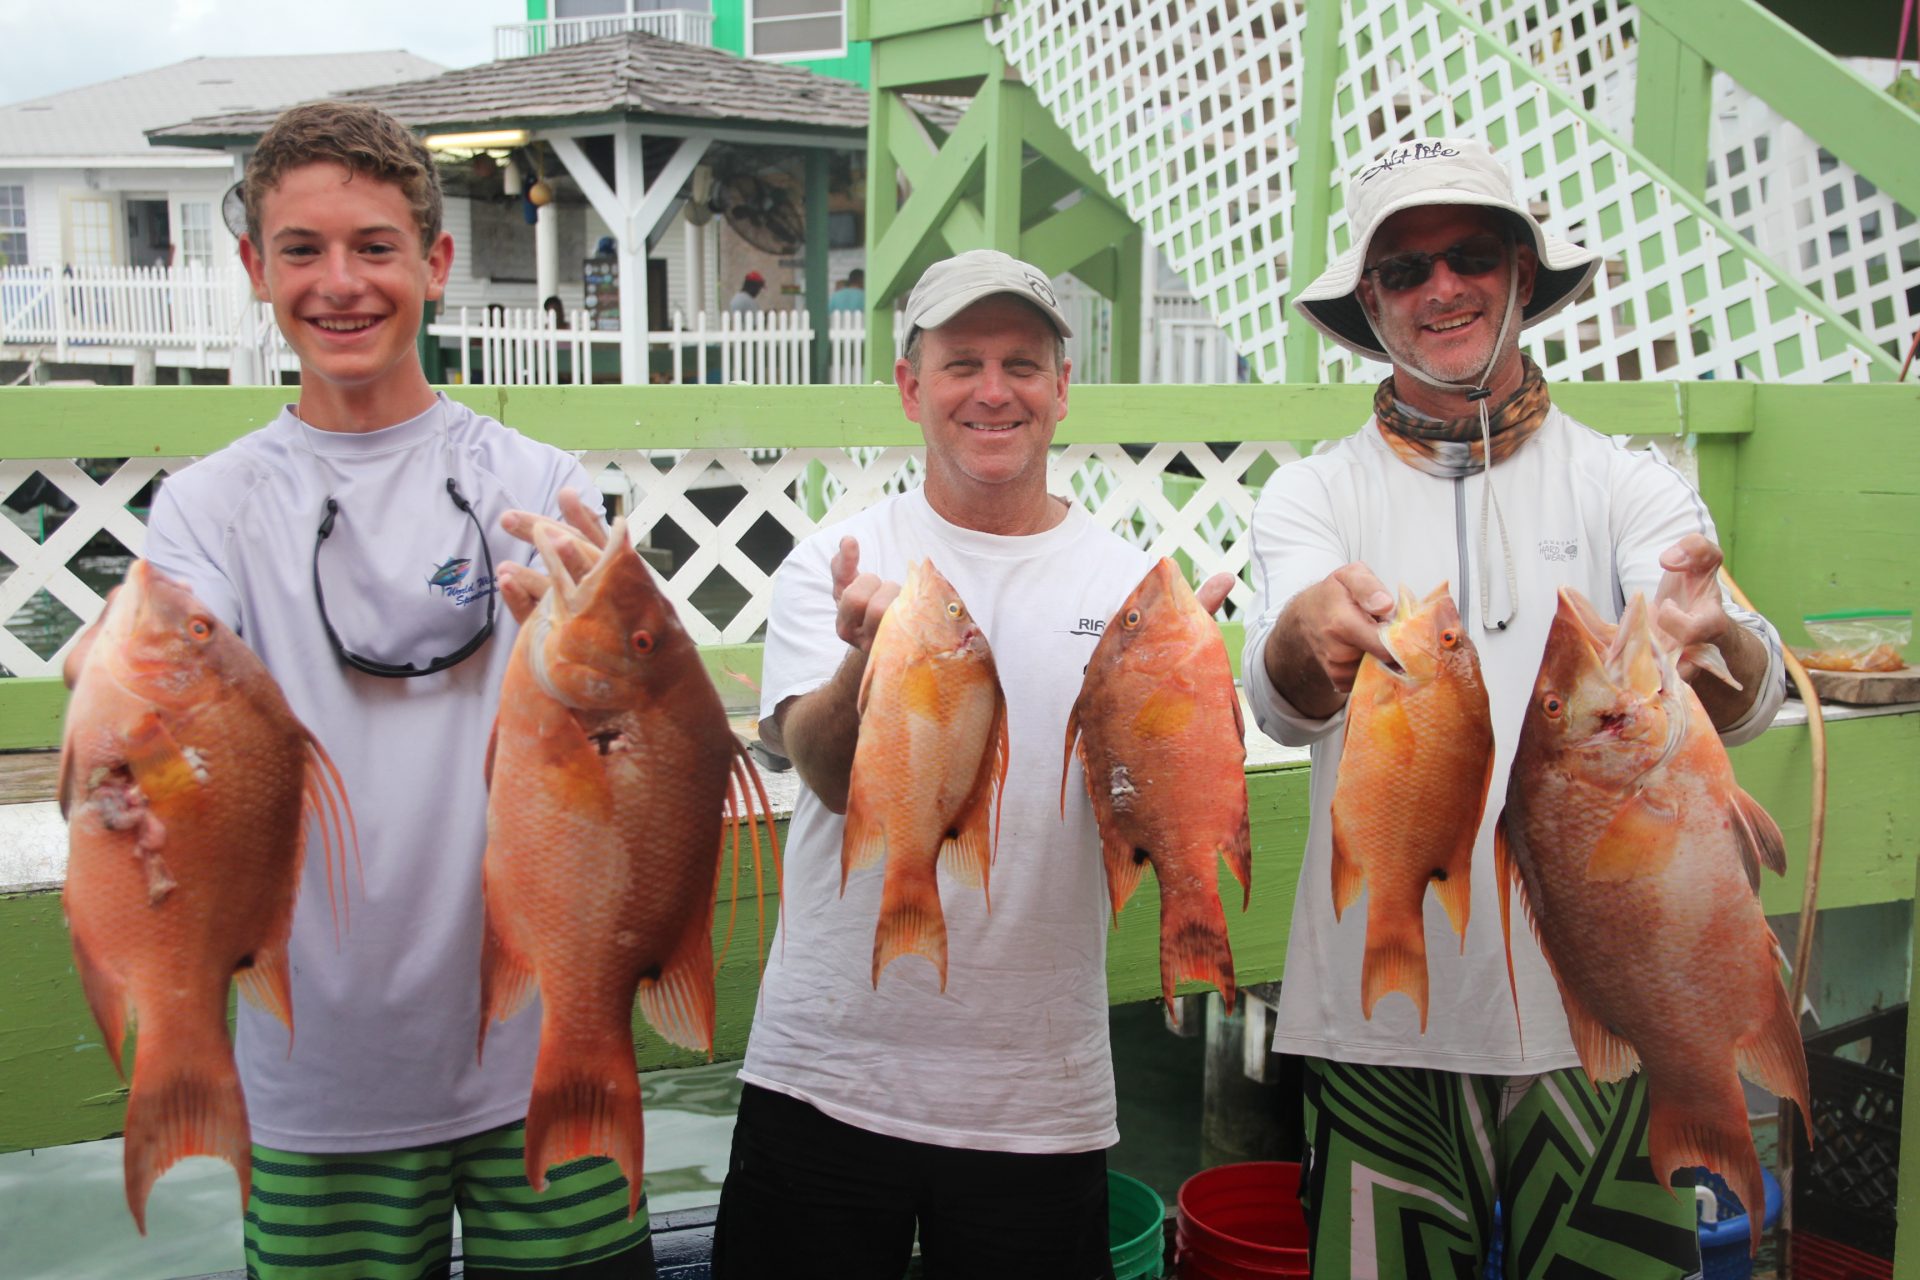 Zach, Mike Bundy and Jonathan in Grand Cay with some rather small hogs, especially yours Mike.